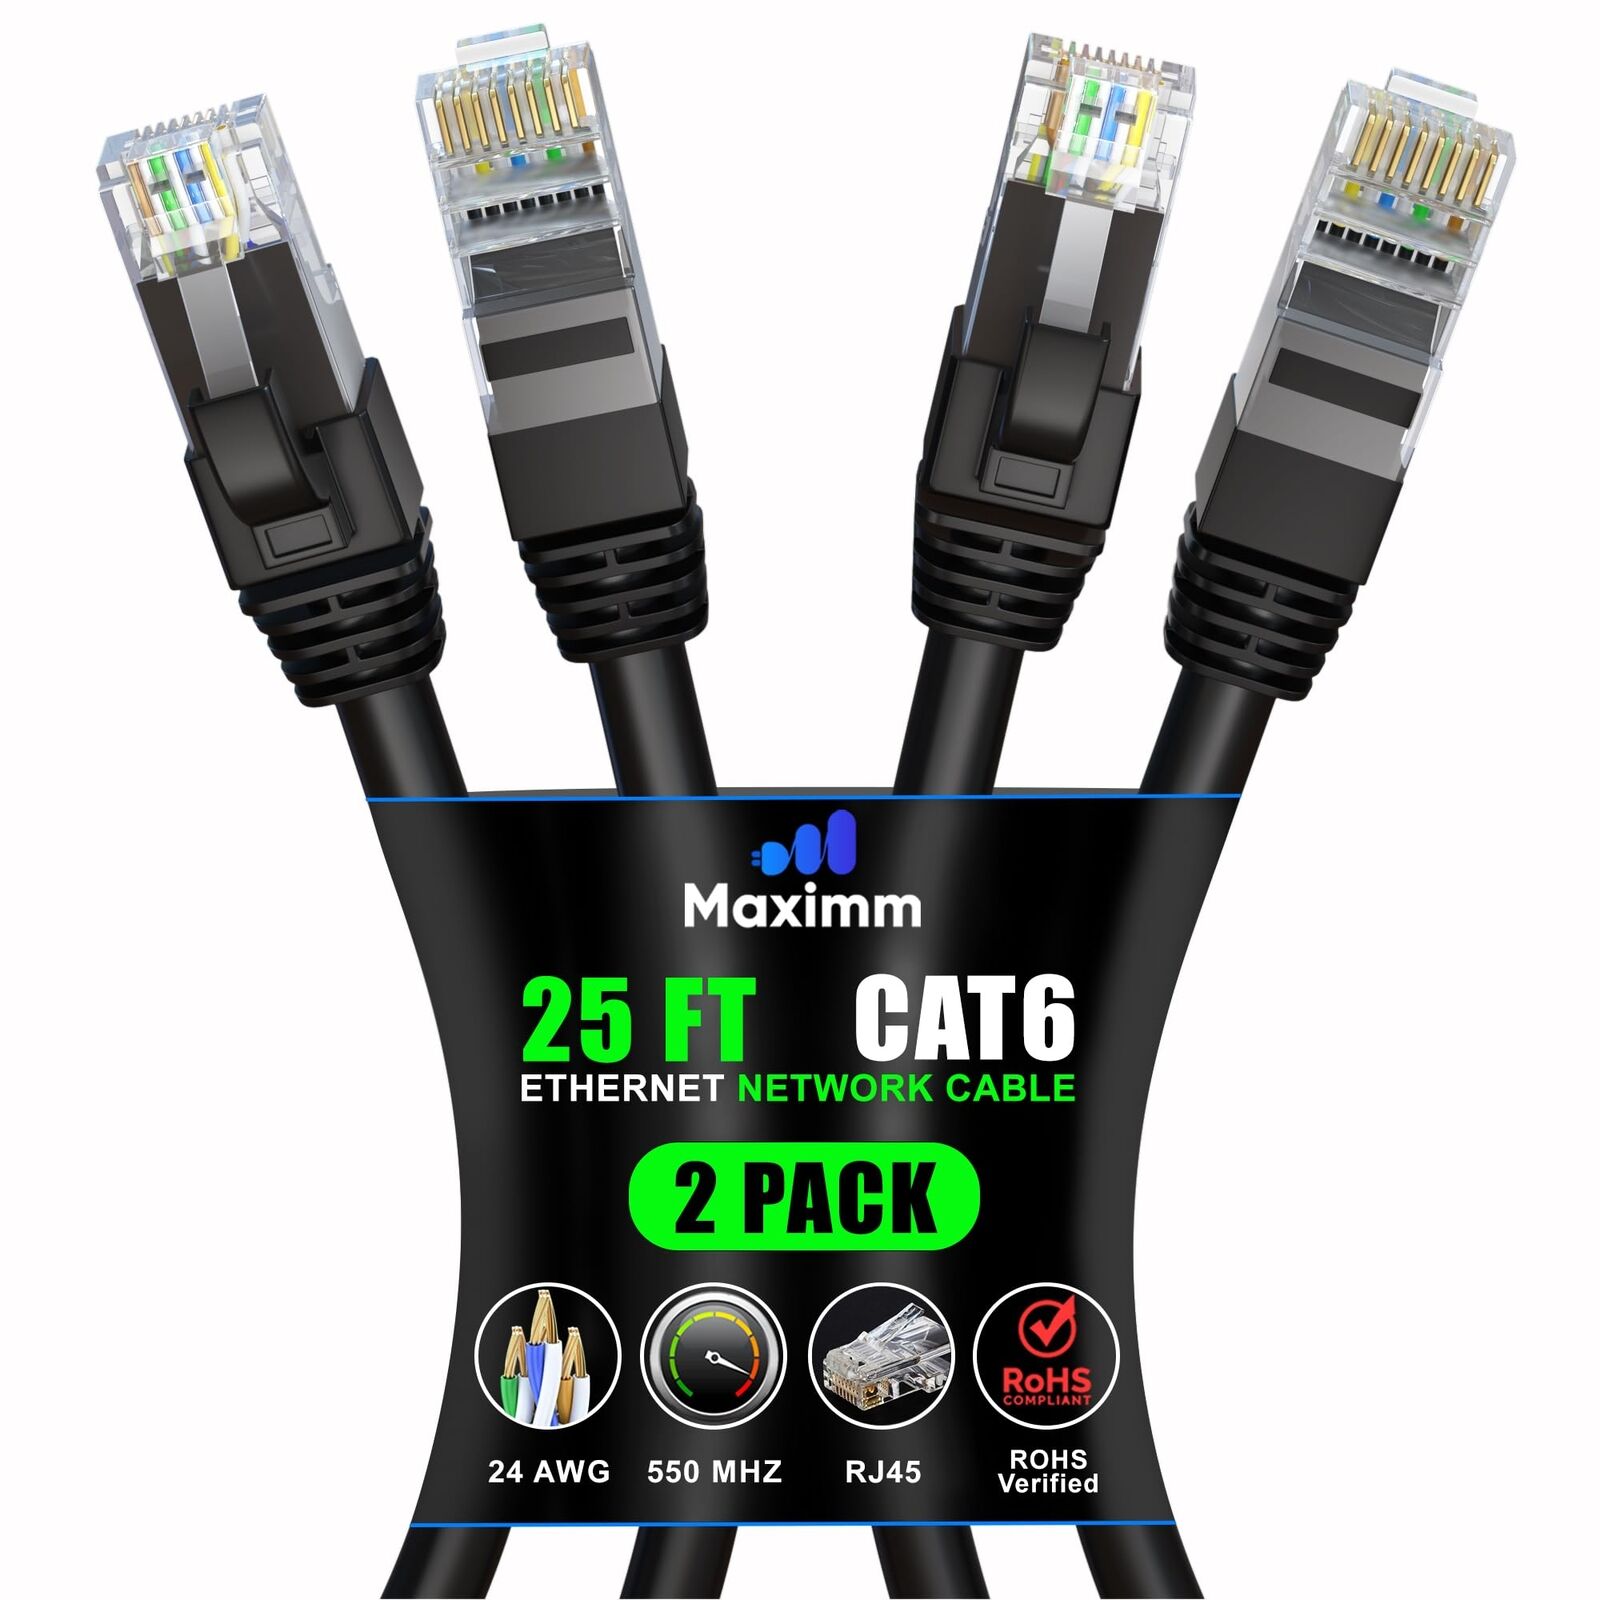 Maximm Cat 6 Ethernet Cable 25 ft 2-Pack - High-Speed LAN Cable Internet Cabl...